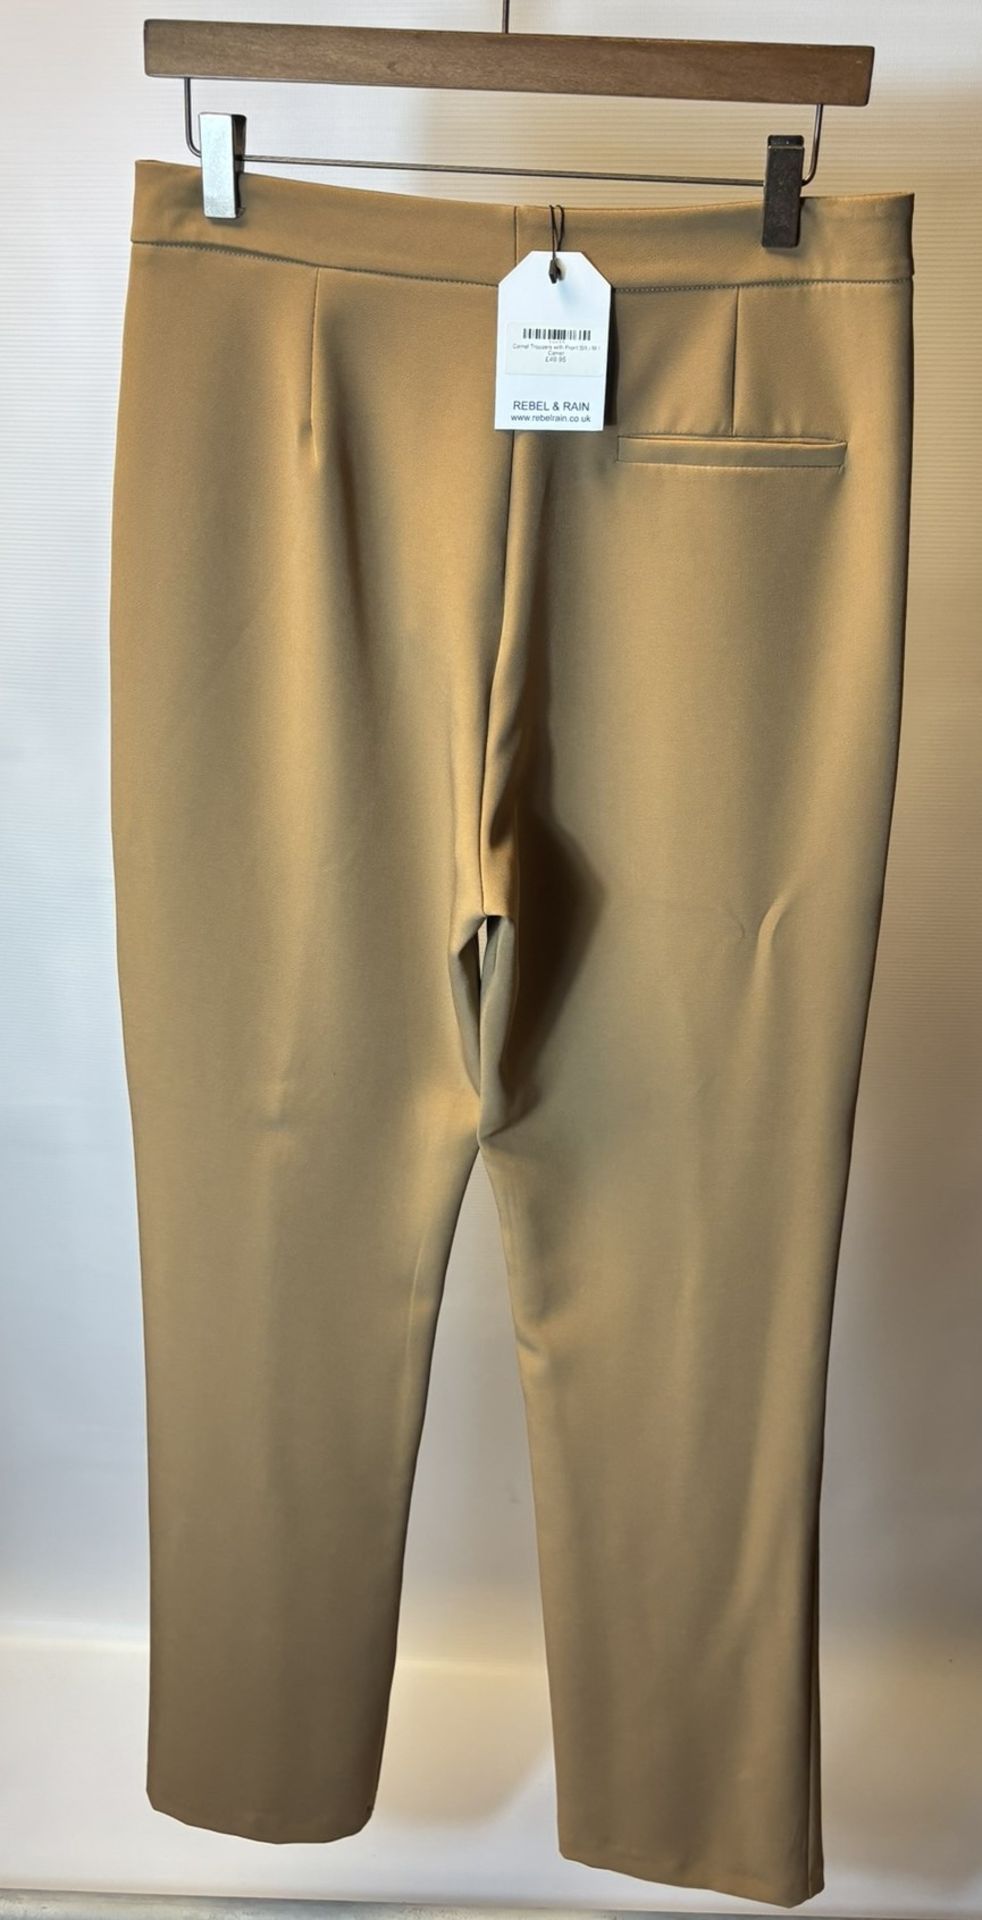 15 x Various Pairs Of Women's Trousers As Seen In Photos - Image 5 of 45